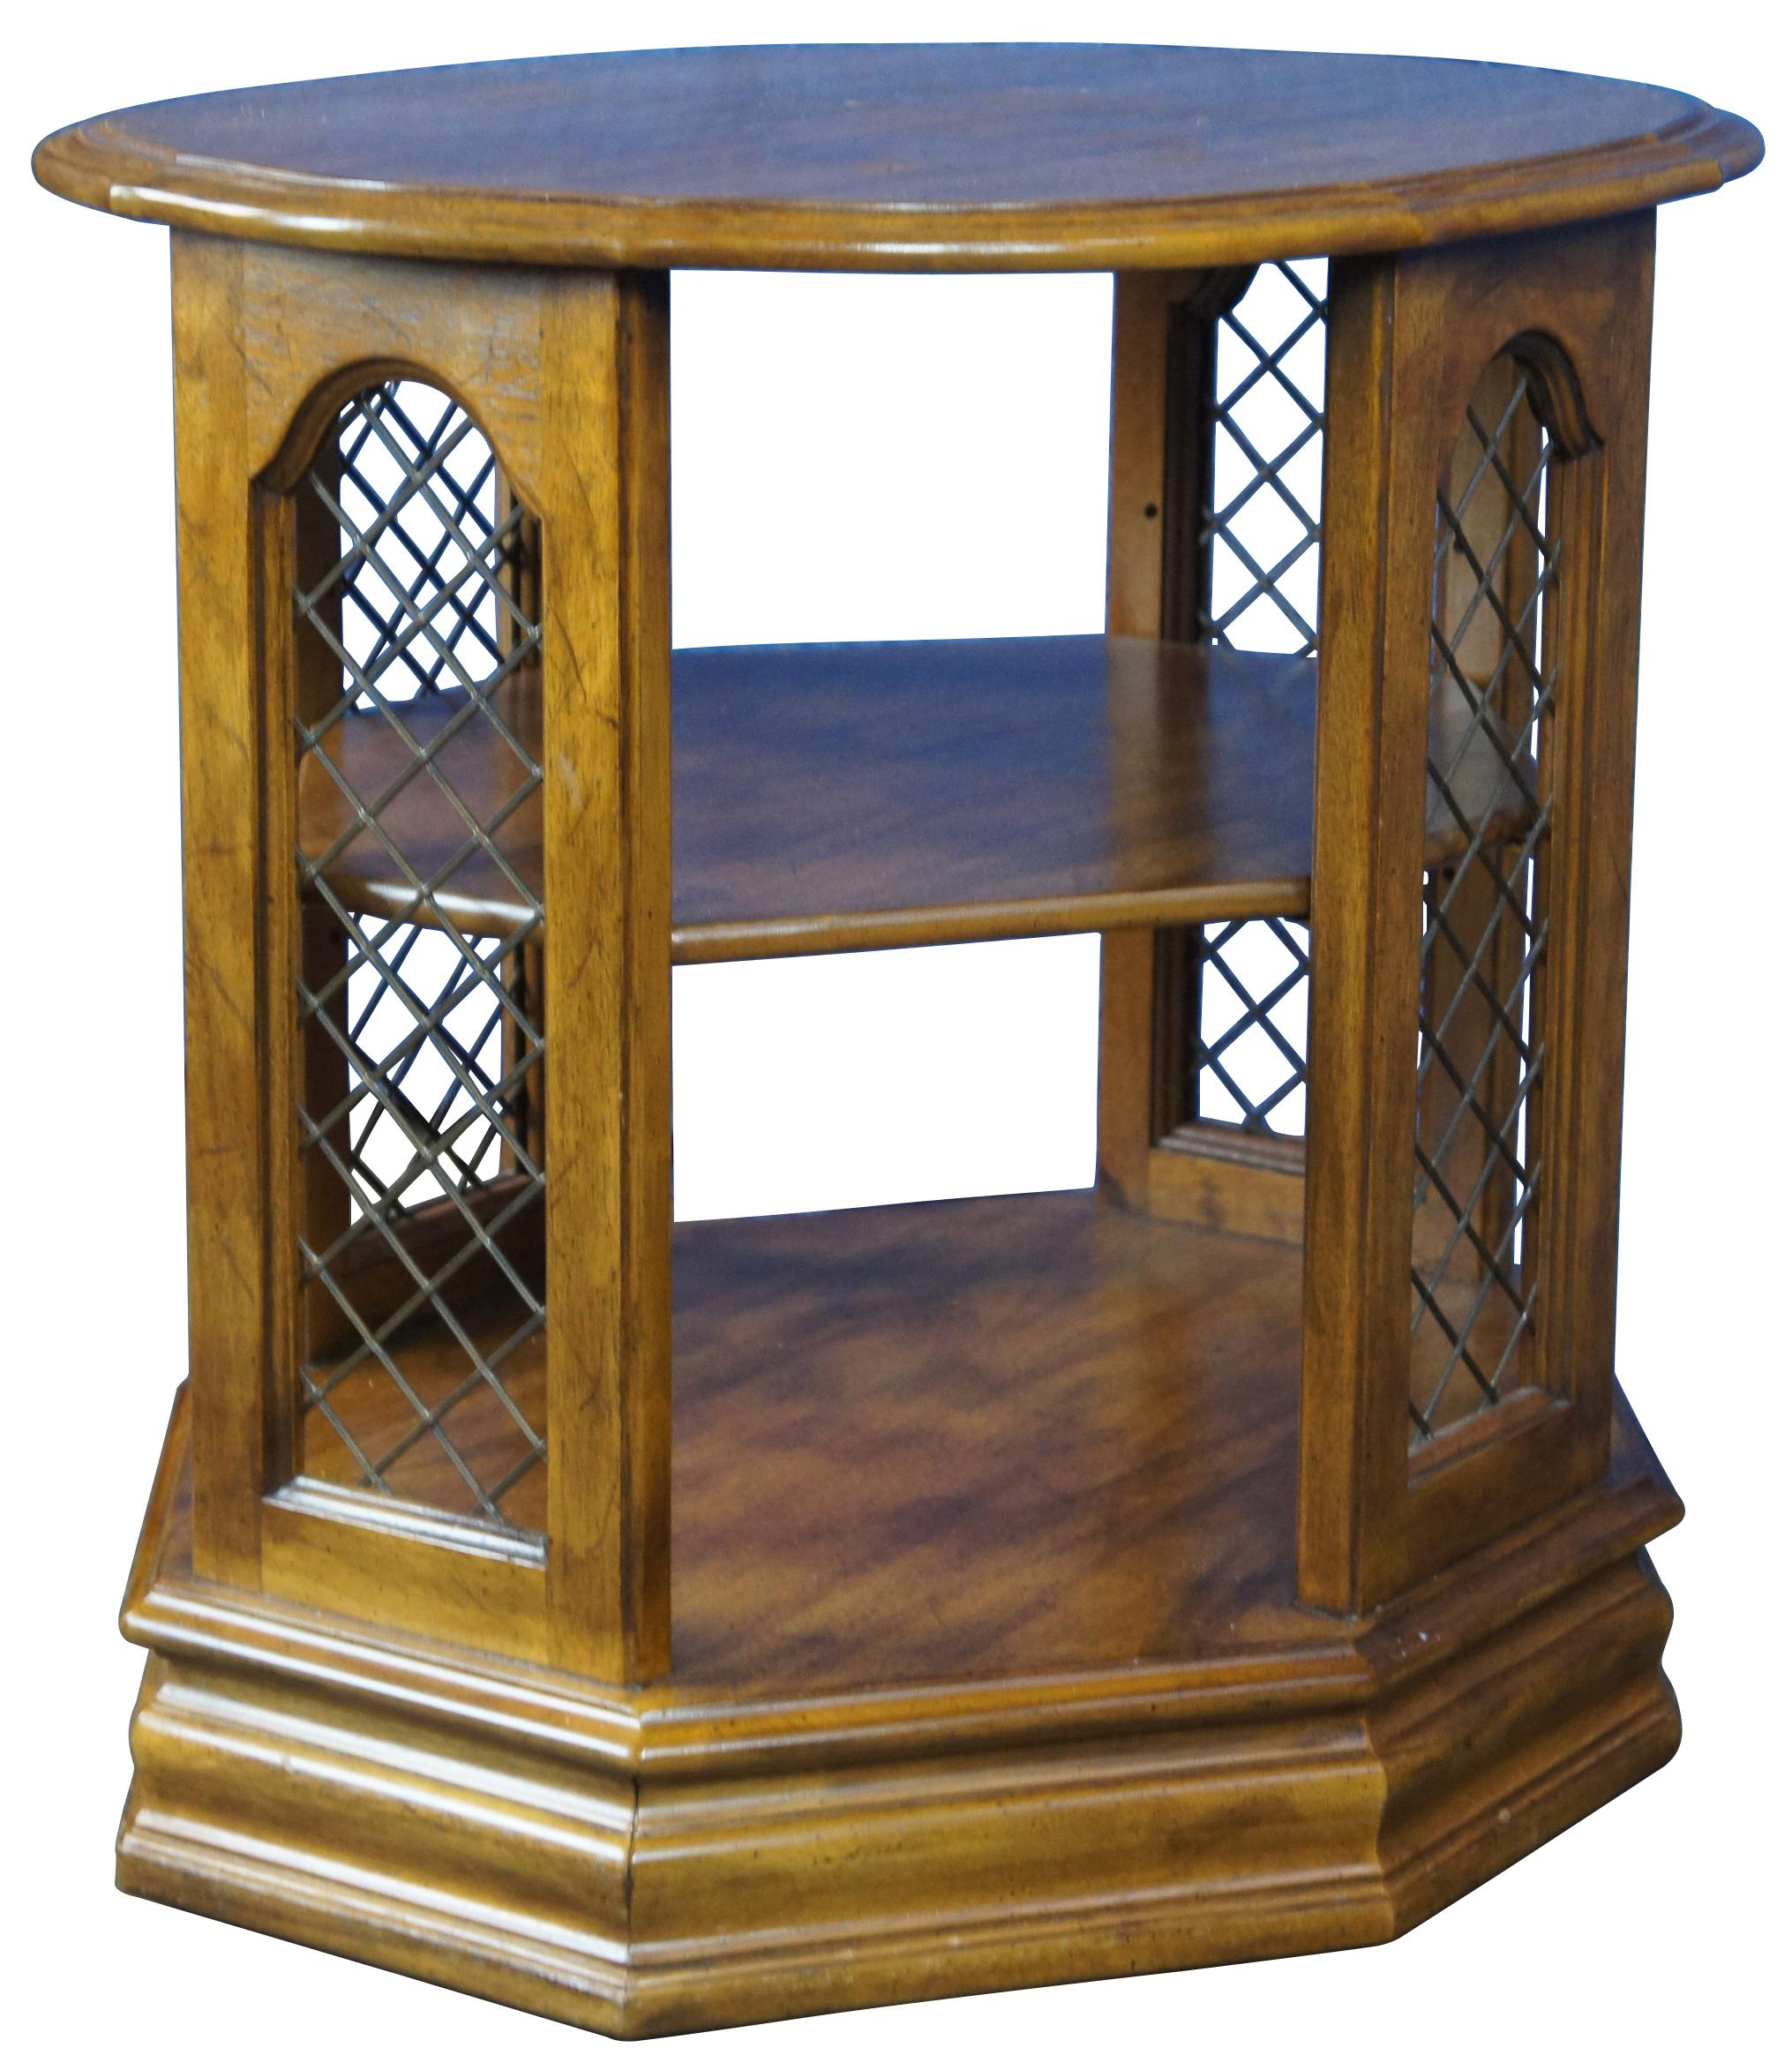 1989 Davis Cabinet Walnut 3 Tiered Octagonal Oval Side End Book Table Lattice In Good Condition For Sale In Dayton, OH